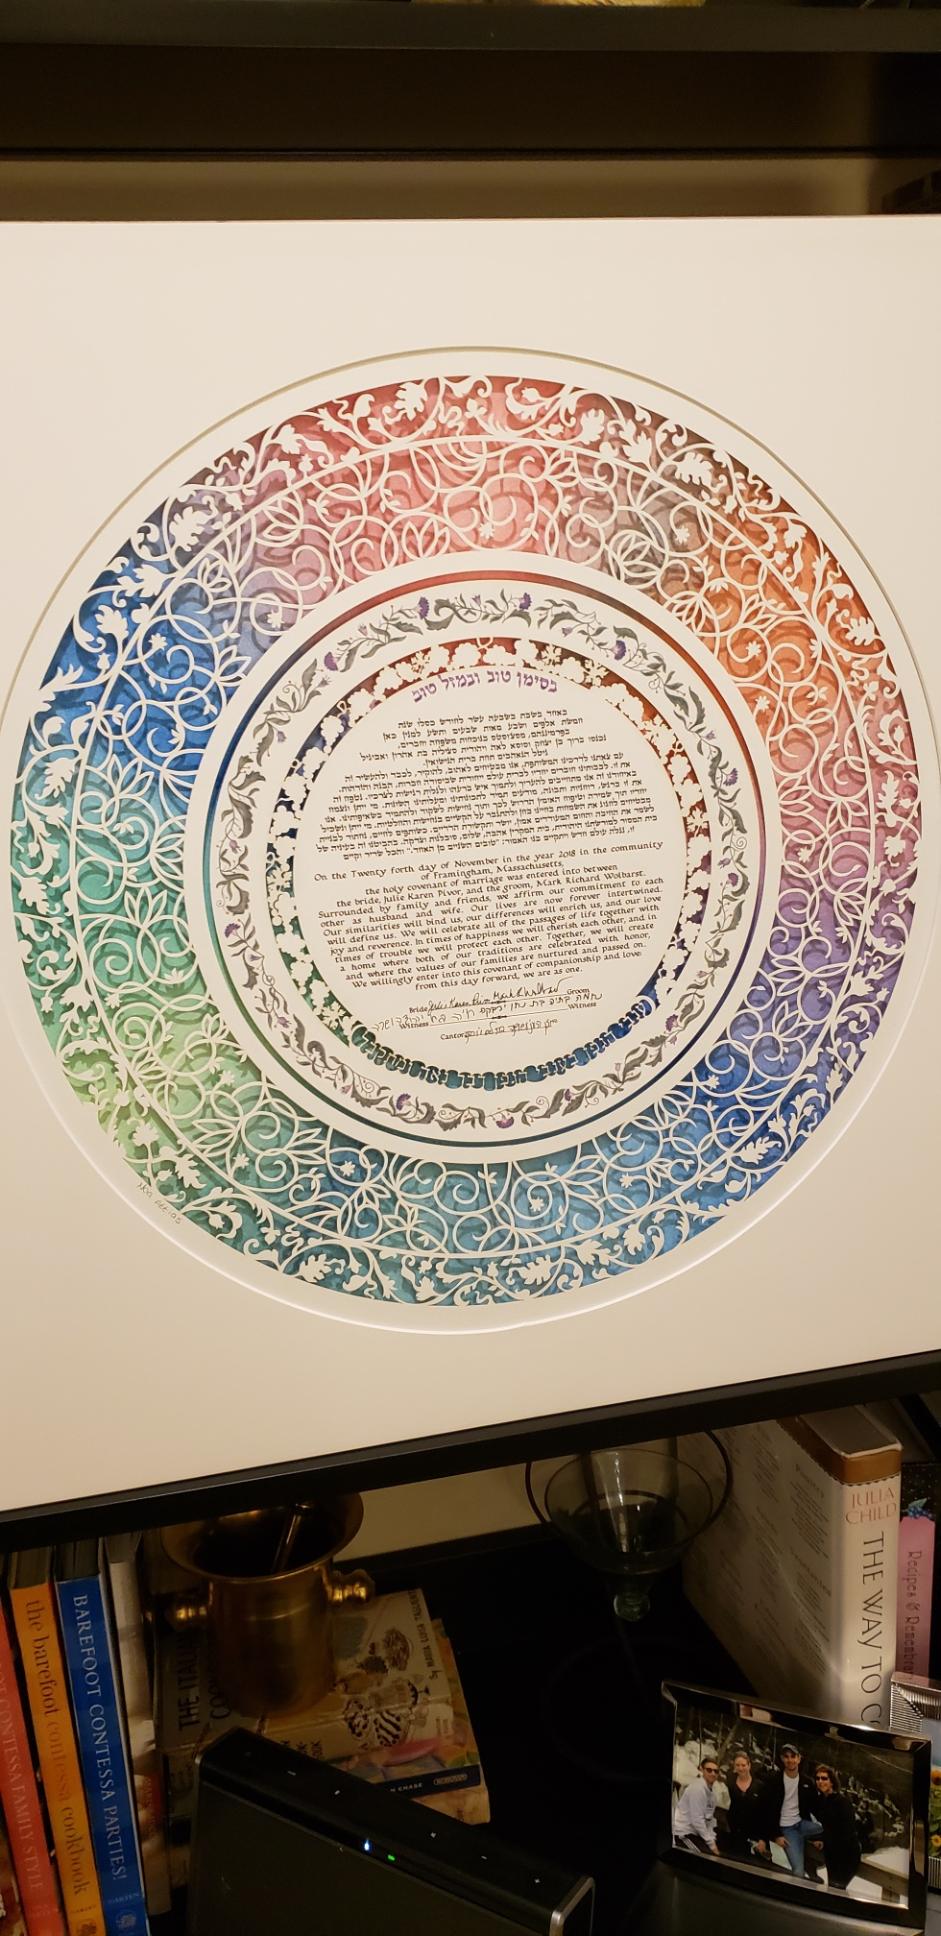 3. An image collage showing various symbols used in Ketubah art, like wine cups, doves, and pomegranates.